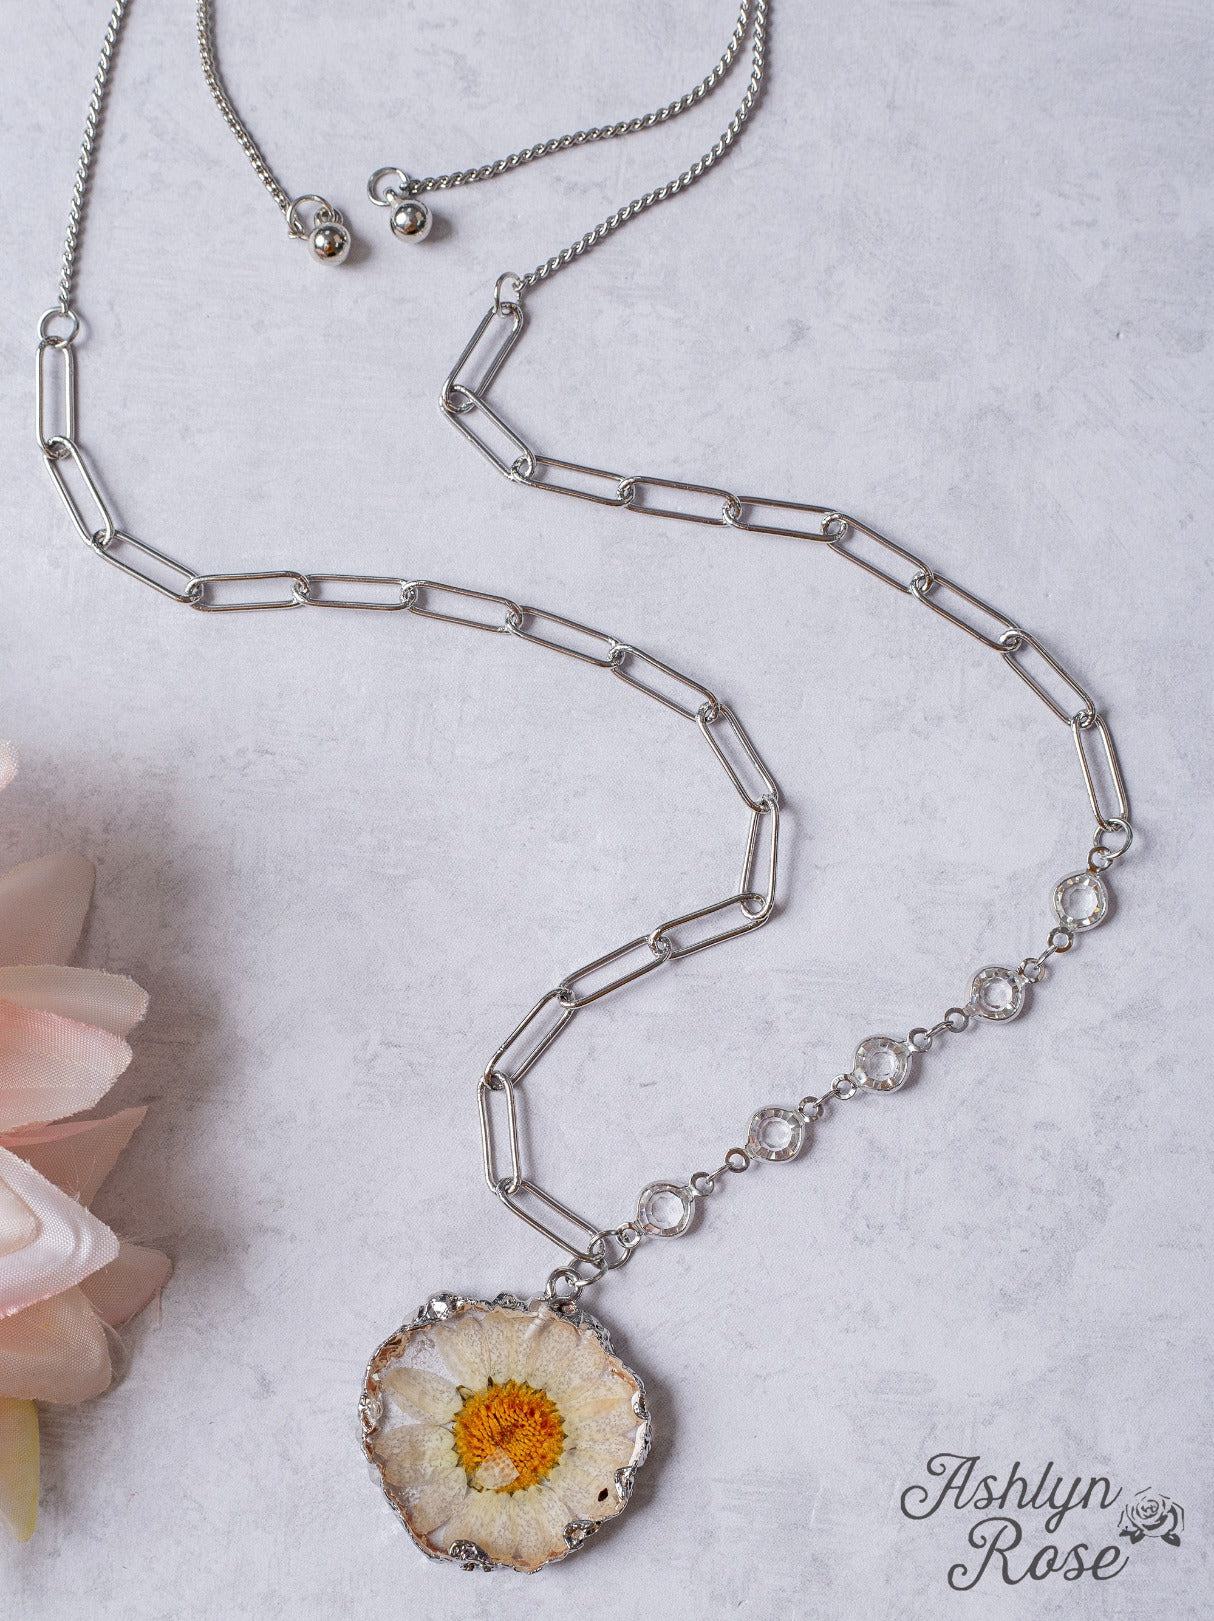 SHINE BRIGHT DAISY RESIN SILVER LINKED CHAIN NECKLACE